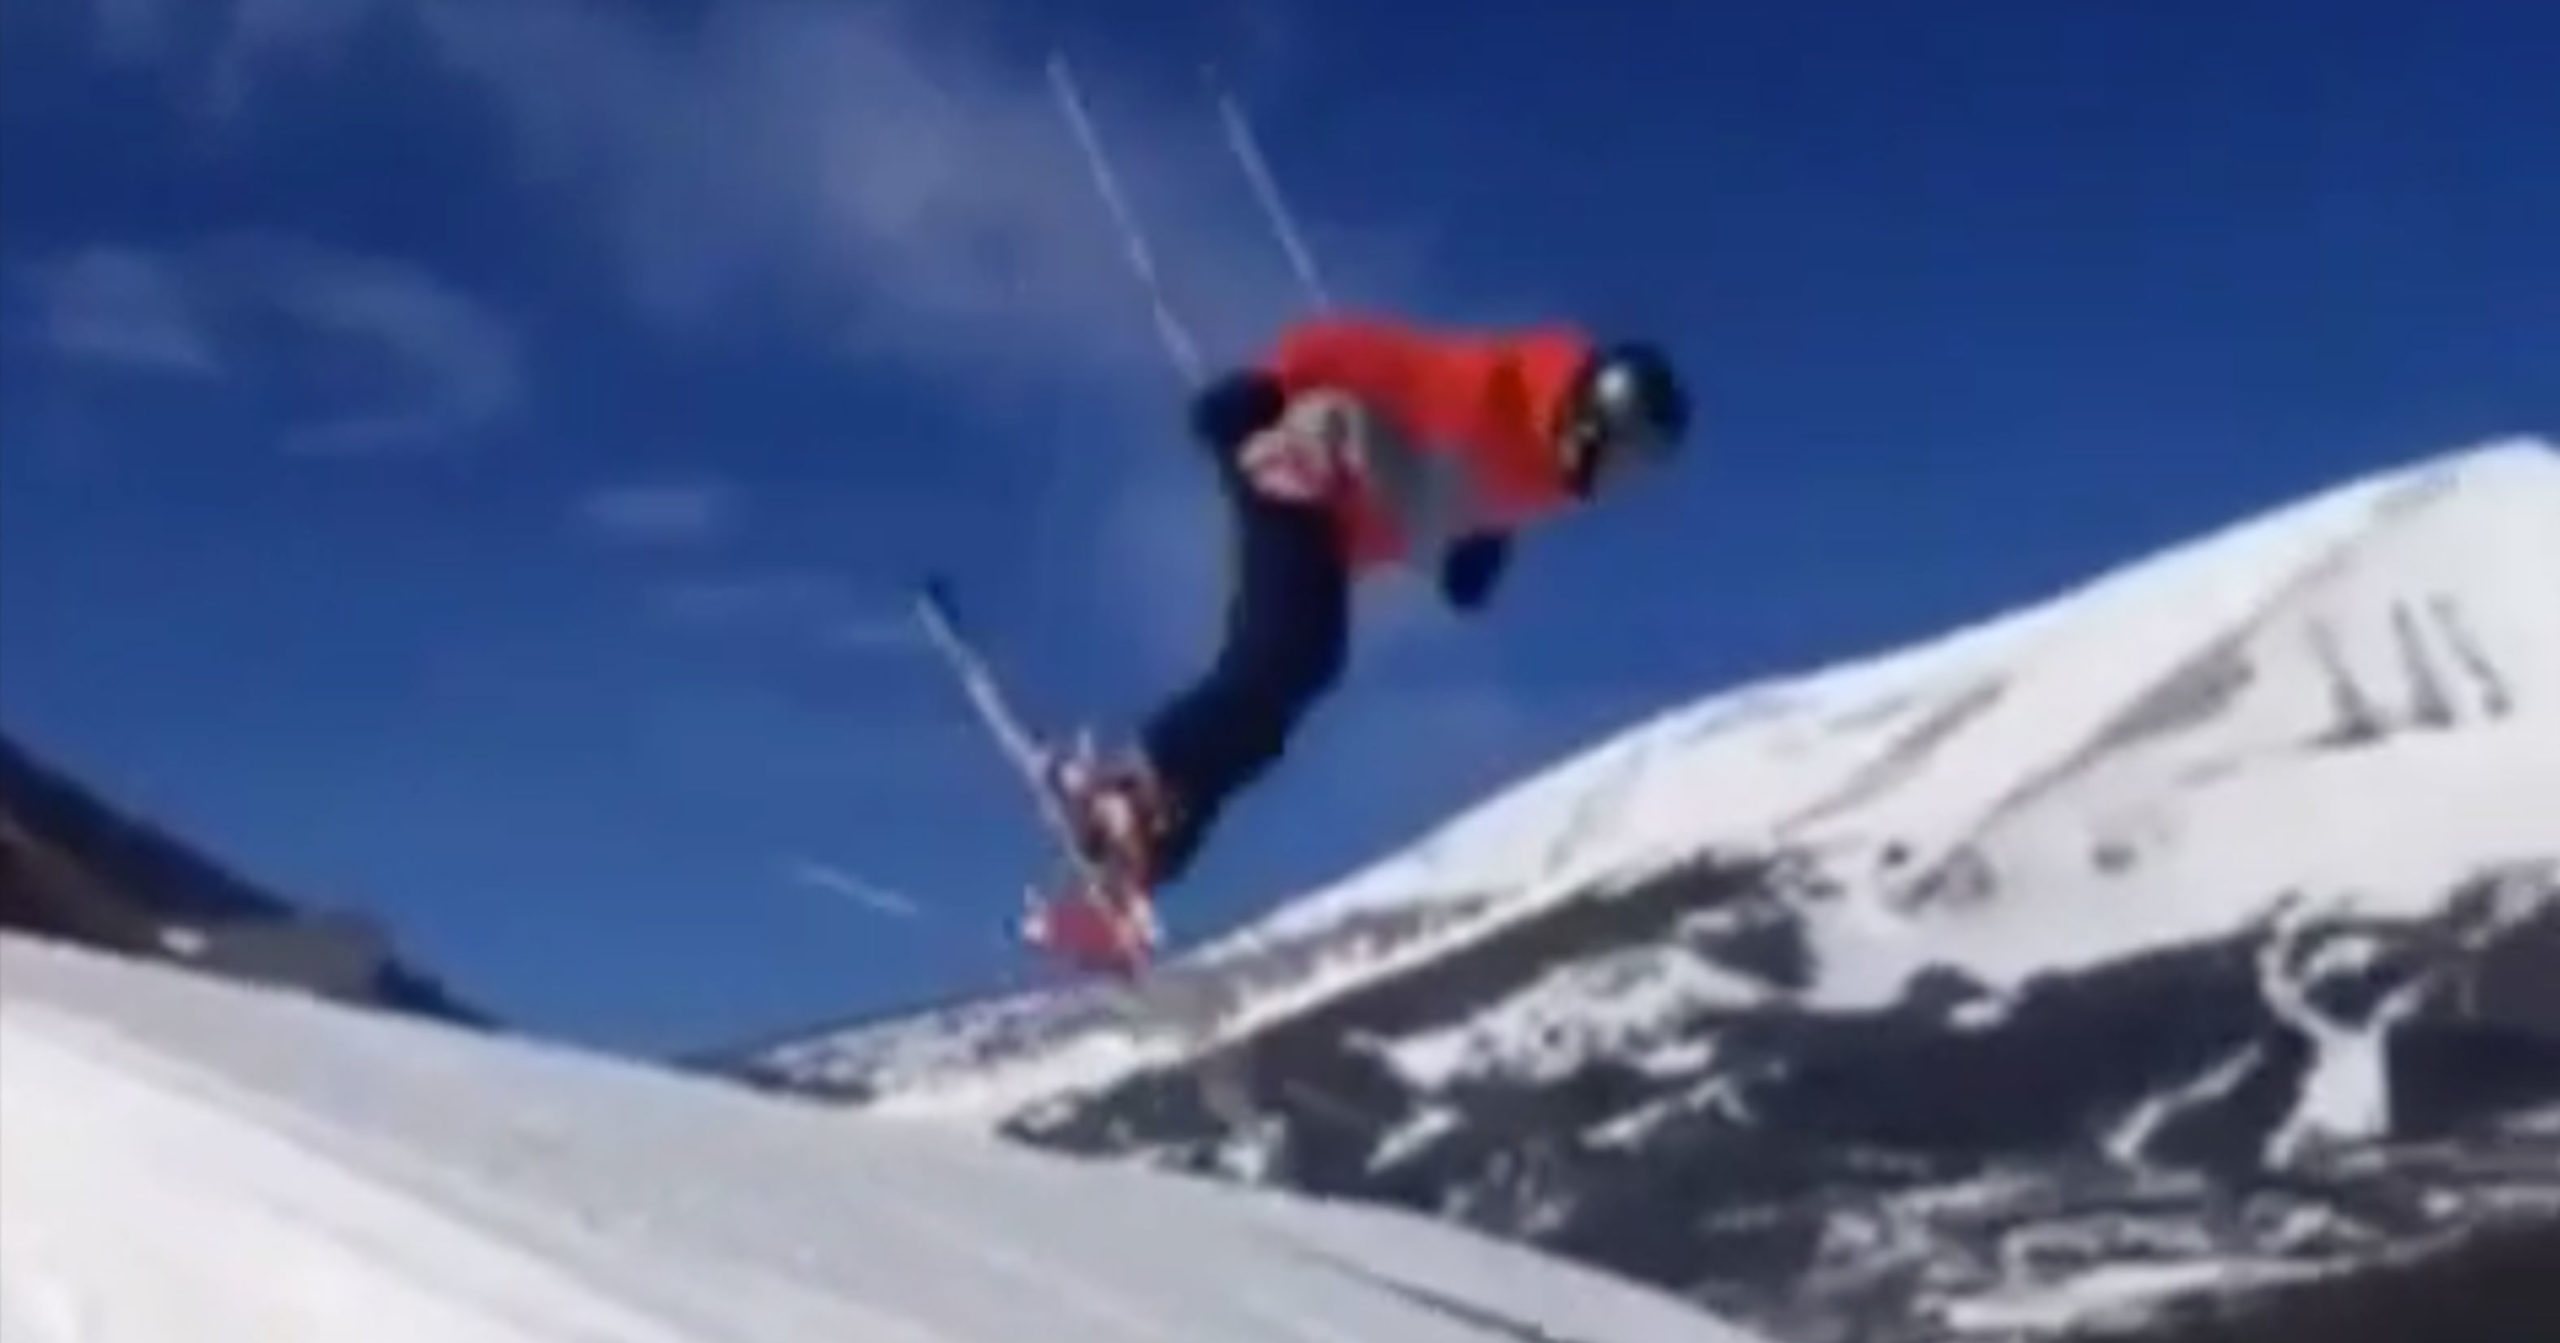 crazy snowboard wipeouts